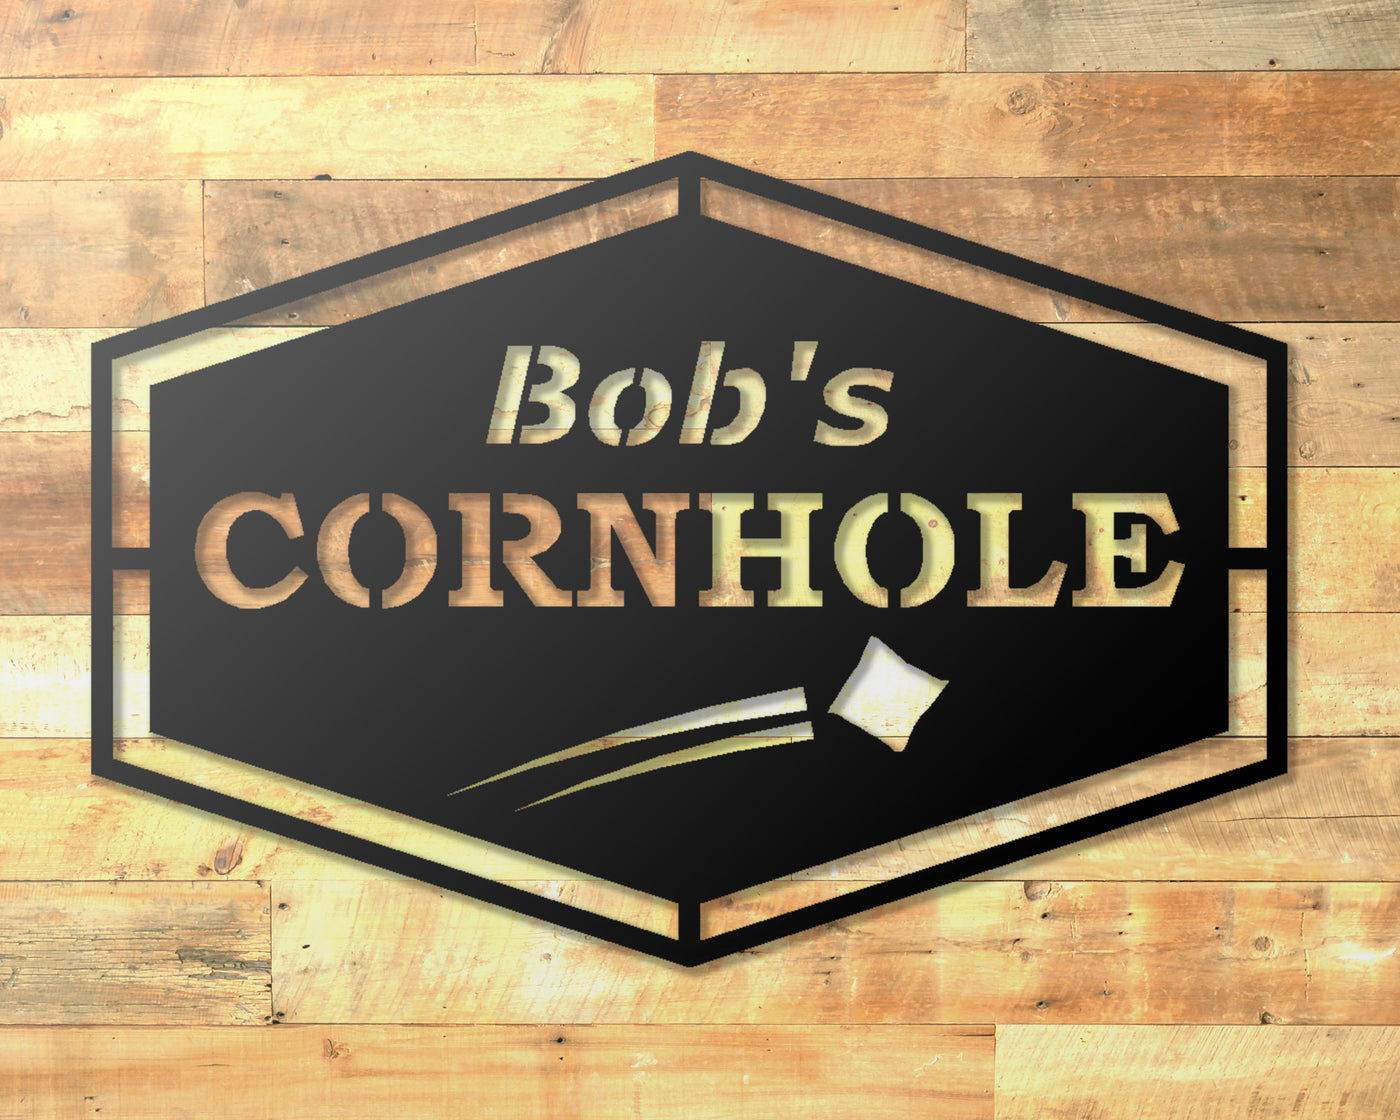 Personalized Cornhole Metal Sign - Madison Iron and Wood - Personalized sign - metal outdoor decor - Steel deocrations - american made products - veteran owned business products - fencing decorations - fencing supplies - custom wall decorations - personalized wall signs - steel - decorative post caps - steel post caps - metal post caps - brackets - structural brackets - home improvement - easter - easter decorations - easter gift - easter yard decor